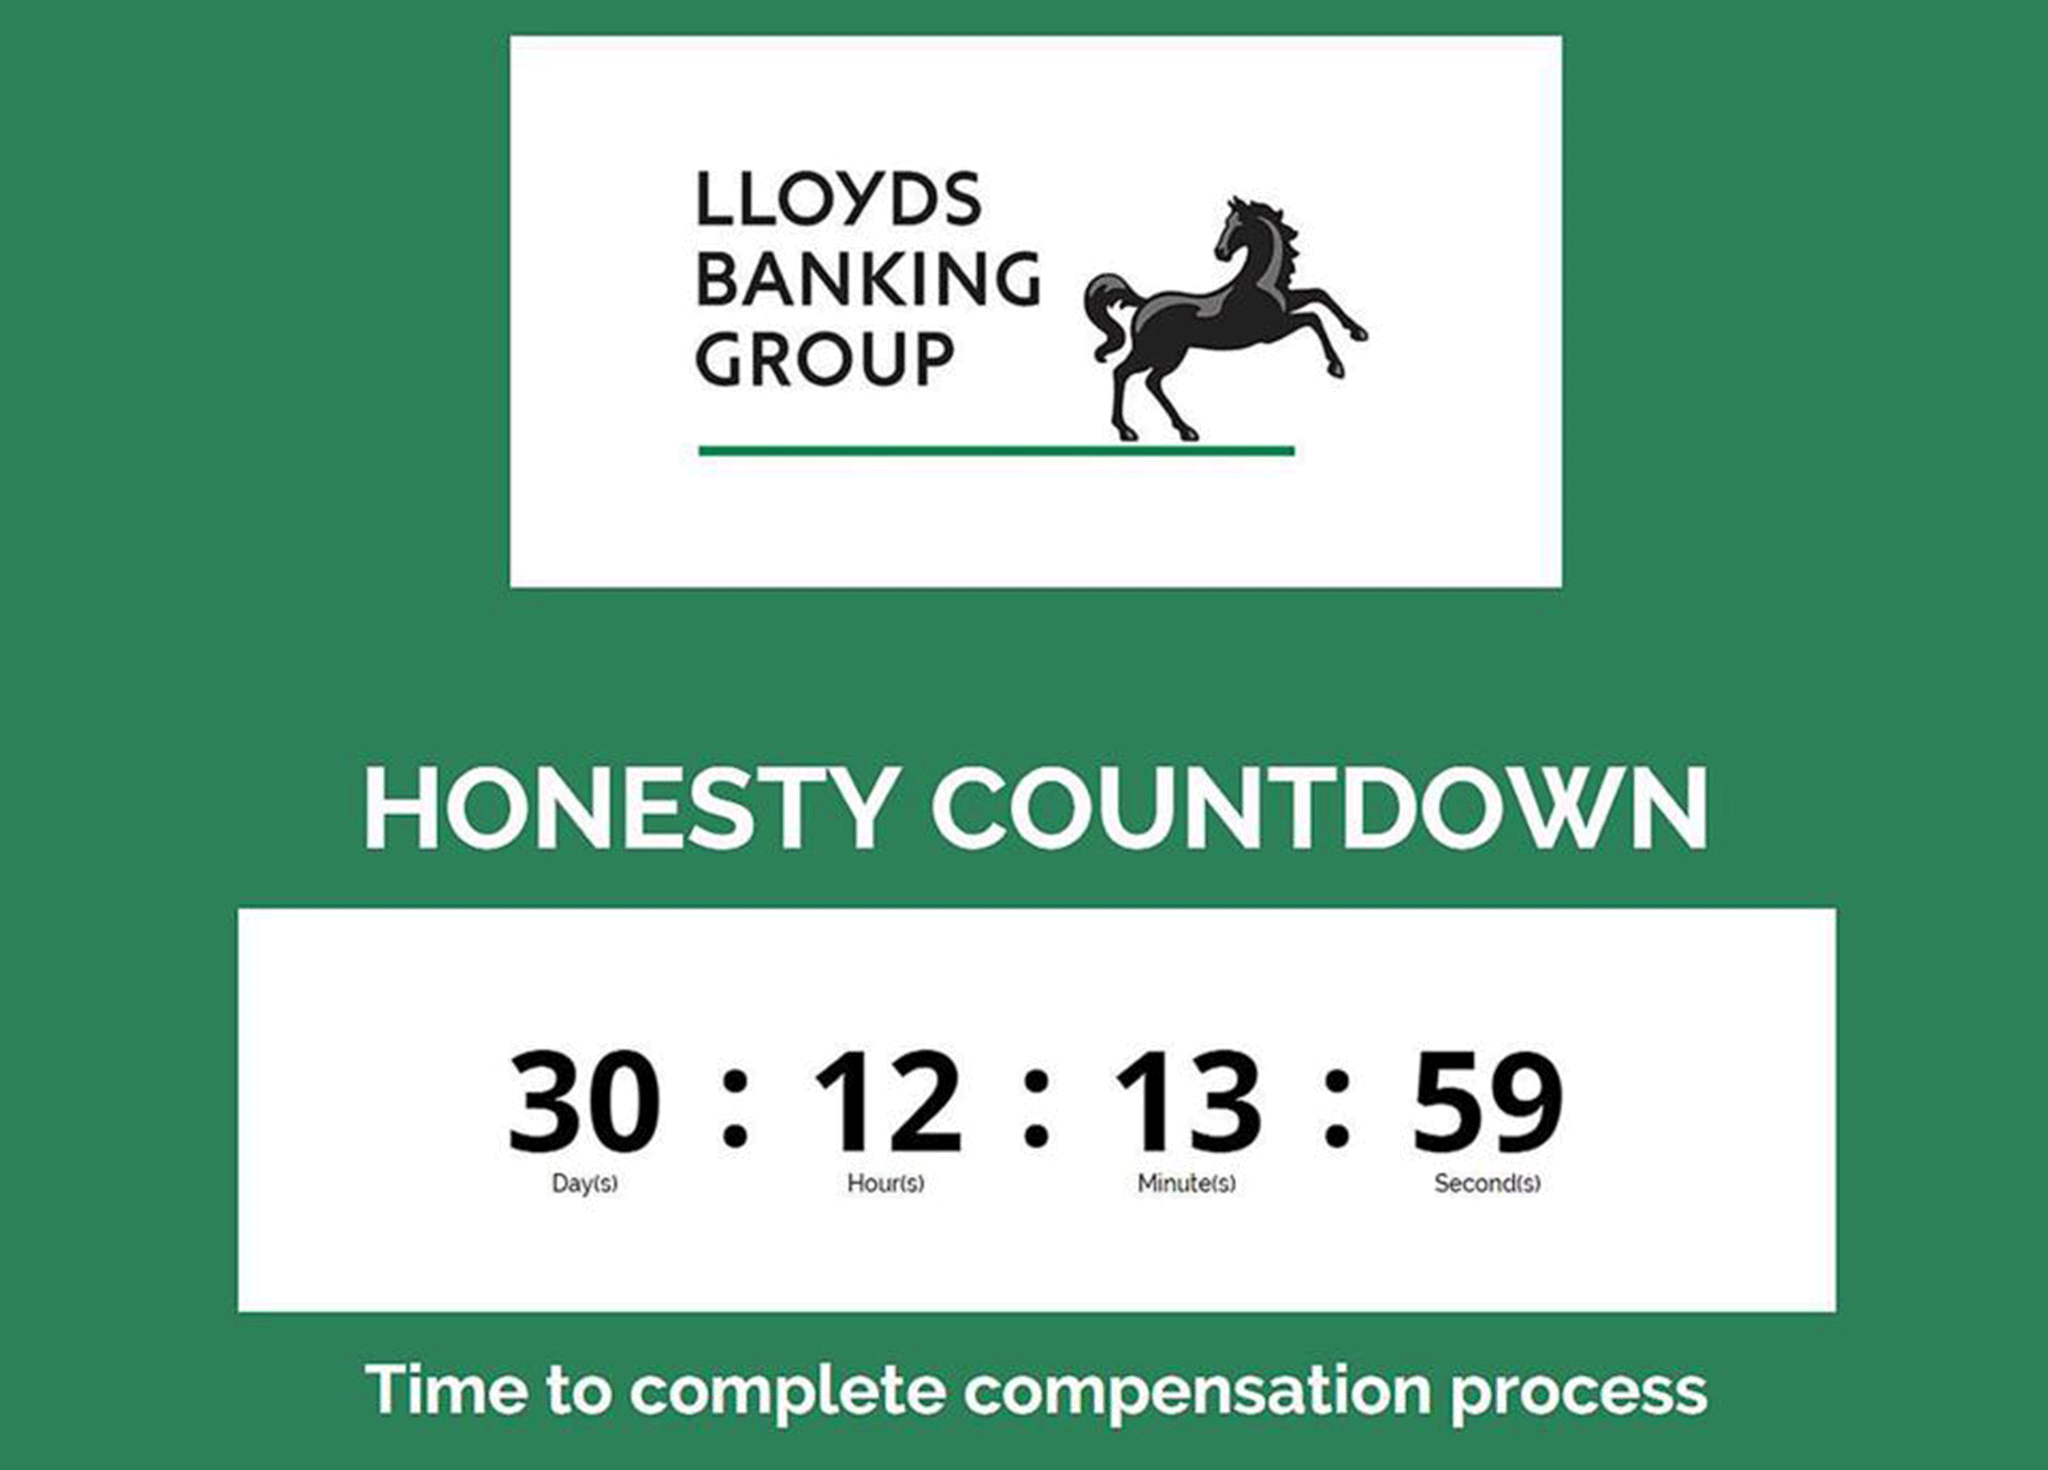 The countdown set up by Noel Edmonds to pressure Lloyds Bank